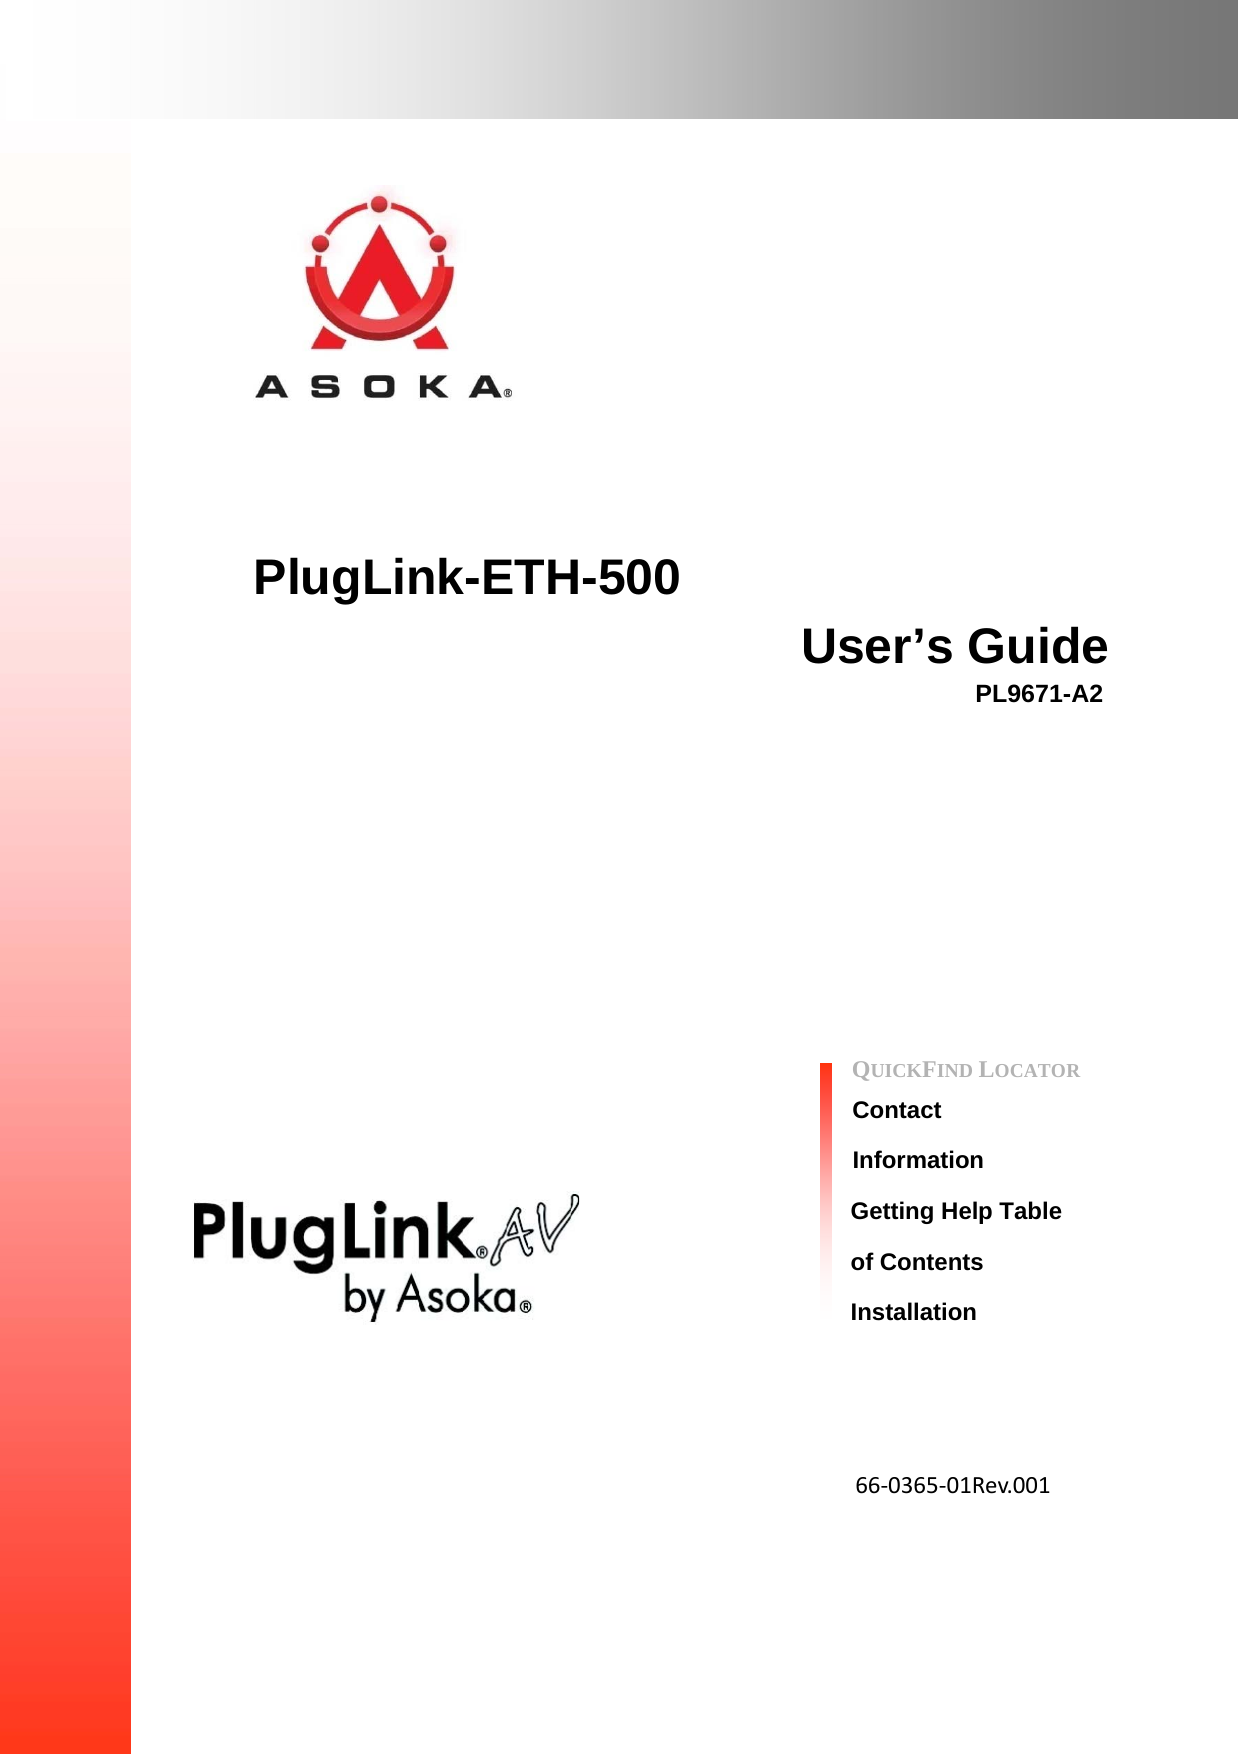          PlugLink-ETH-500 User’s Guide PL9671-A2                  QUICKFIND LOCATOR  Contact  Information Getting Help Table of Contents Installation        66‐0365‐01Rev.001